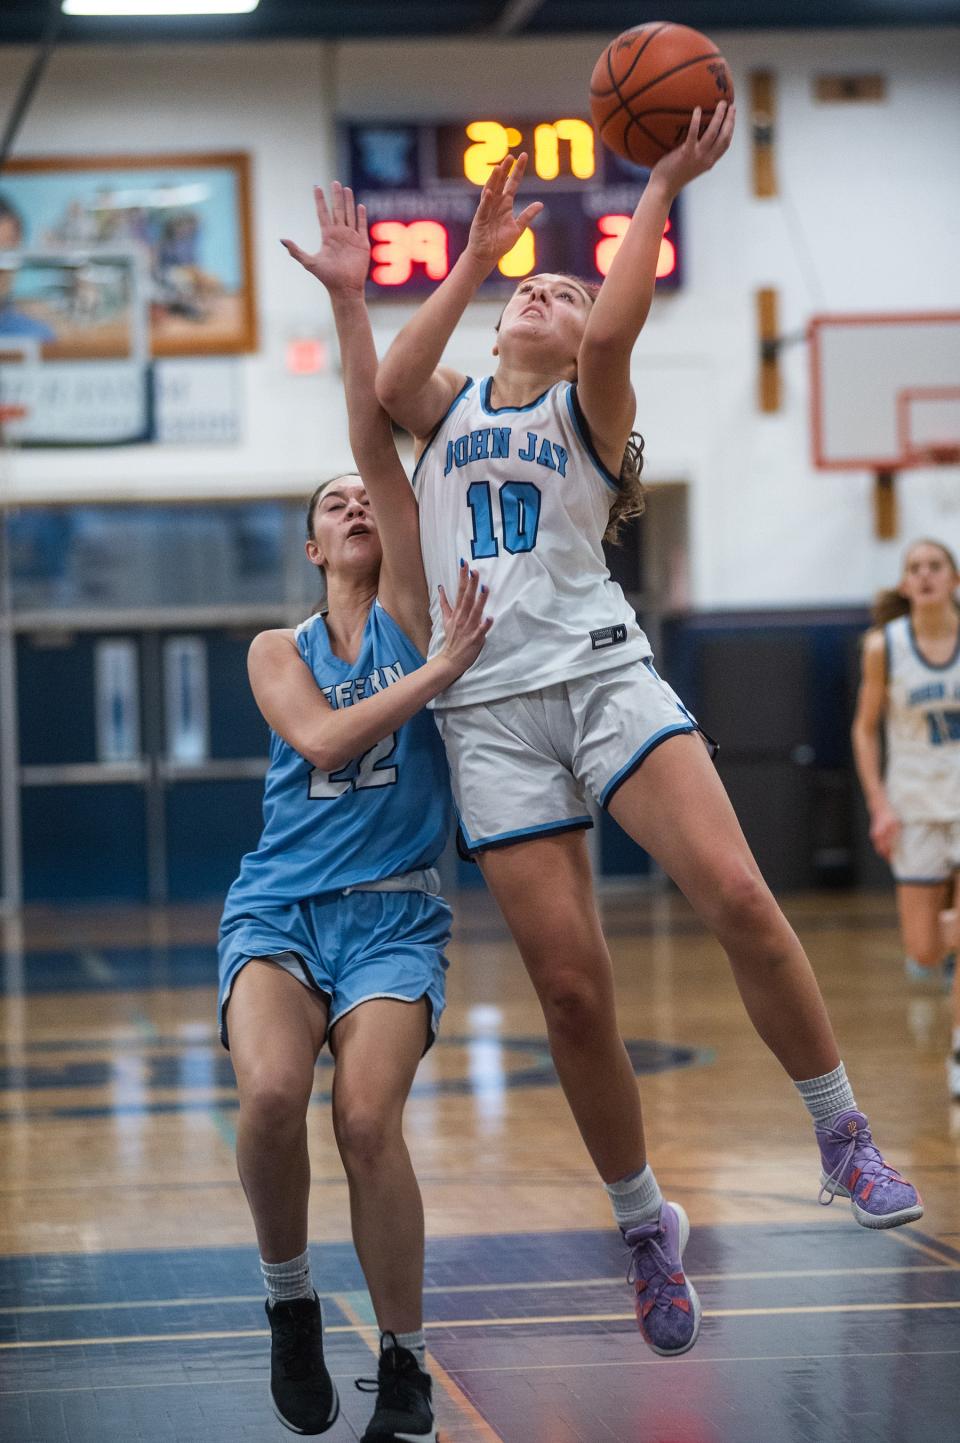 Suffern's Nicole DeBellis, left, attemps to block John Jay East Fishkill's Grace Kennedy, right, from shooting during the Section 1 girls basketball game at John Jay East Fishkill in Wiccopee, NY on Friday, February 17, 2023. John Jay East Fishkill defeated Suffern. KELLY MARSH/FOR THE POUGHKEEPSIE JOURNAL